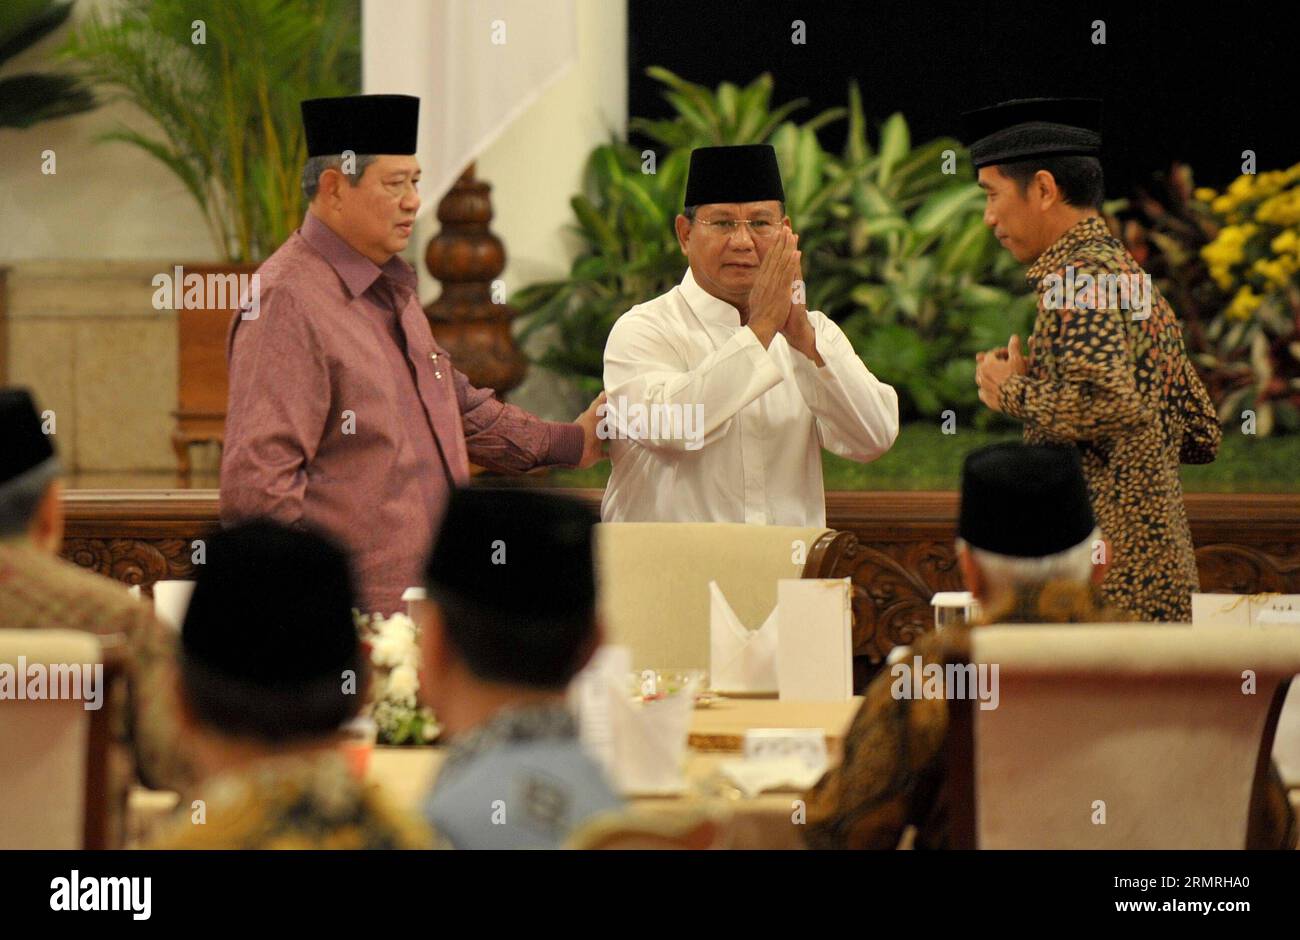 (140720) -- JAKARTA, July 20, 2014 (Xinhua) -- Indonesian presidential candidate from Great Indonesia Movement Party (GERINDRA) Prabowo Subianto (C) greets people at Indonesia s presidential palace before iftar during the Ramadan in Jakarta, Indonesia, July 20, 2014. Indonesian President Susilo Bambang Yudhoyono invited two pairs of presidential candidates for a iftar together on Sunday before the announcement of election results on July 22. (Xinhua/Agung Kuncahya B.) (zhf) INDONESIA-JAKARTA-PRESIDENTIAL ELECTION CANDIDATES-IFTAR PUBLICATIONxNOTxINxCHN   Jakarta July 20 2014 XINHUA Indonesian Stock Photo